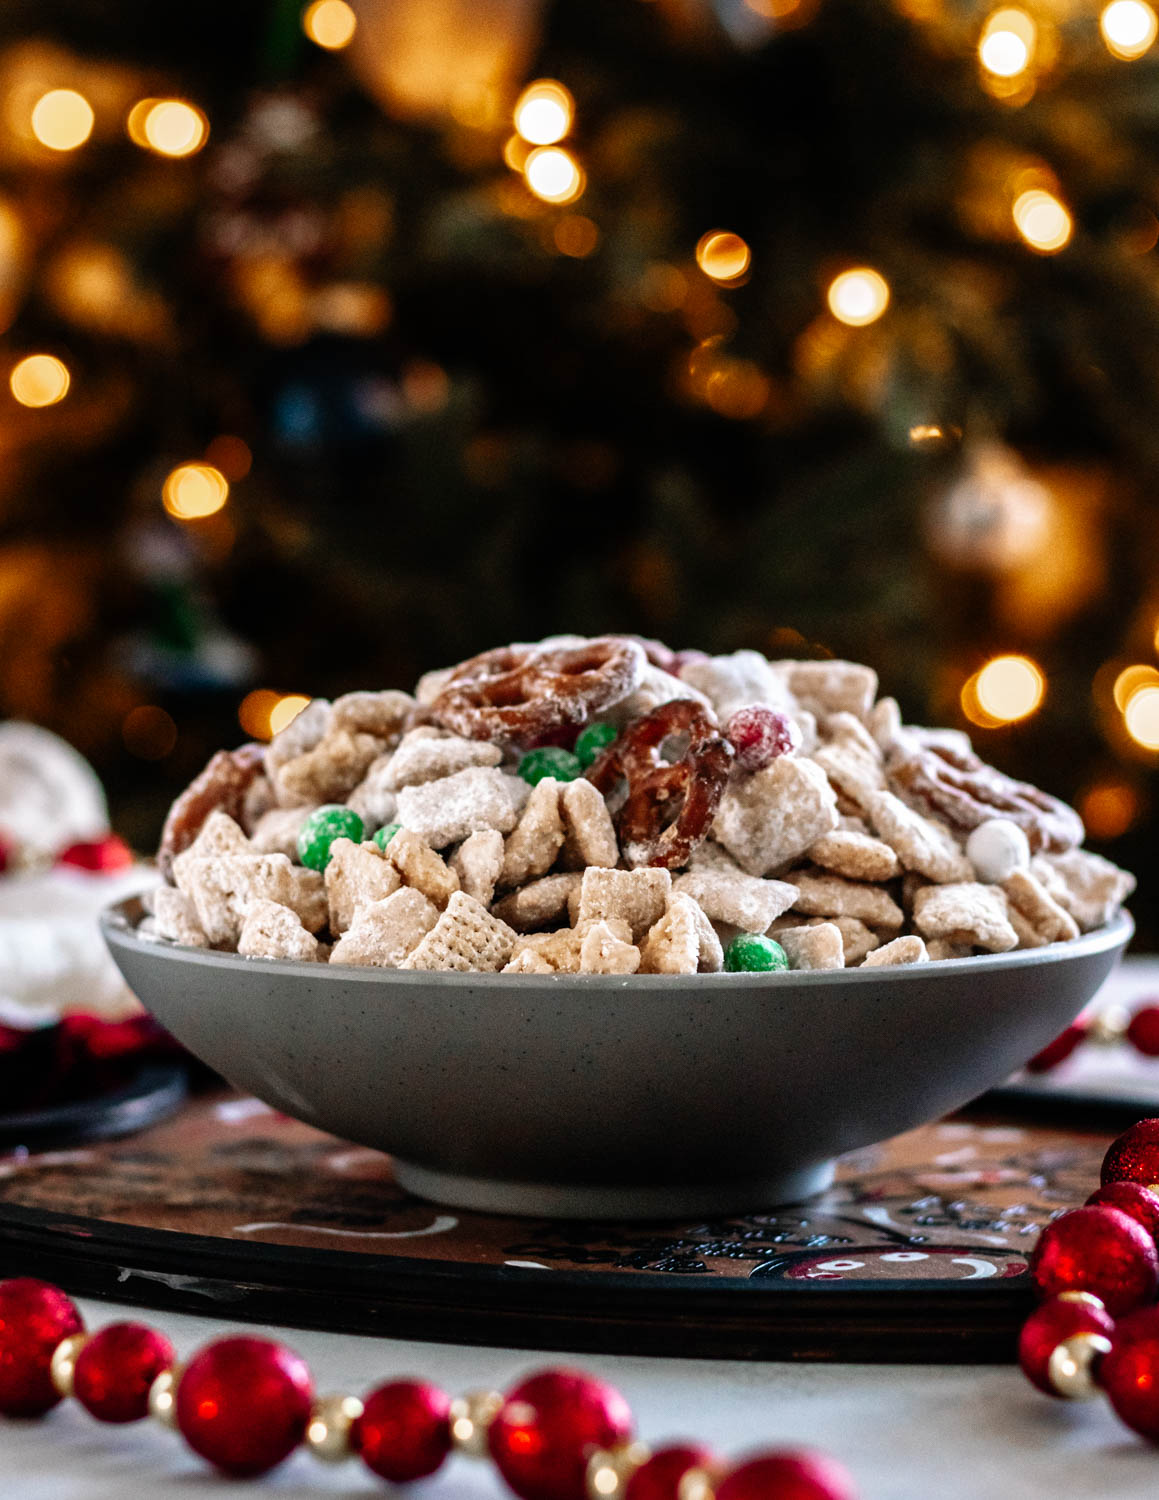 Give Santa what he wants! A bowl of Christmas Muddy Buddy Mix in a grey bowl set in front of a lit Christmas tree